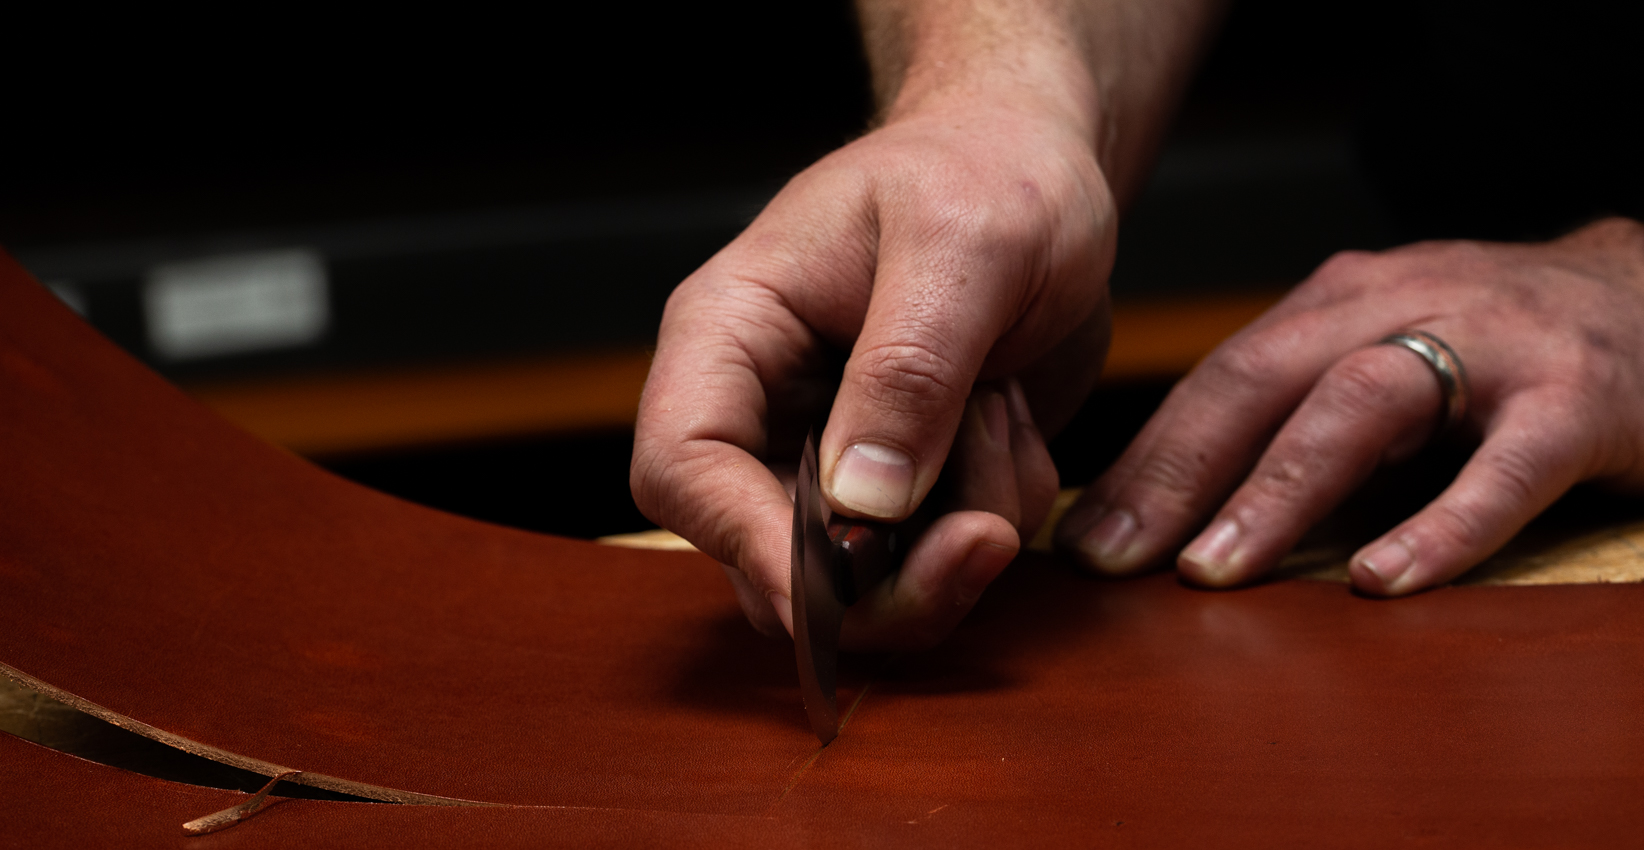 leatherworker cutting leather with round knife